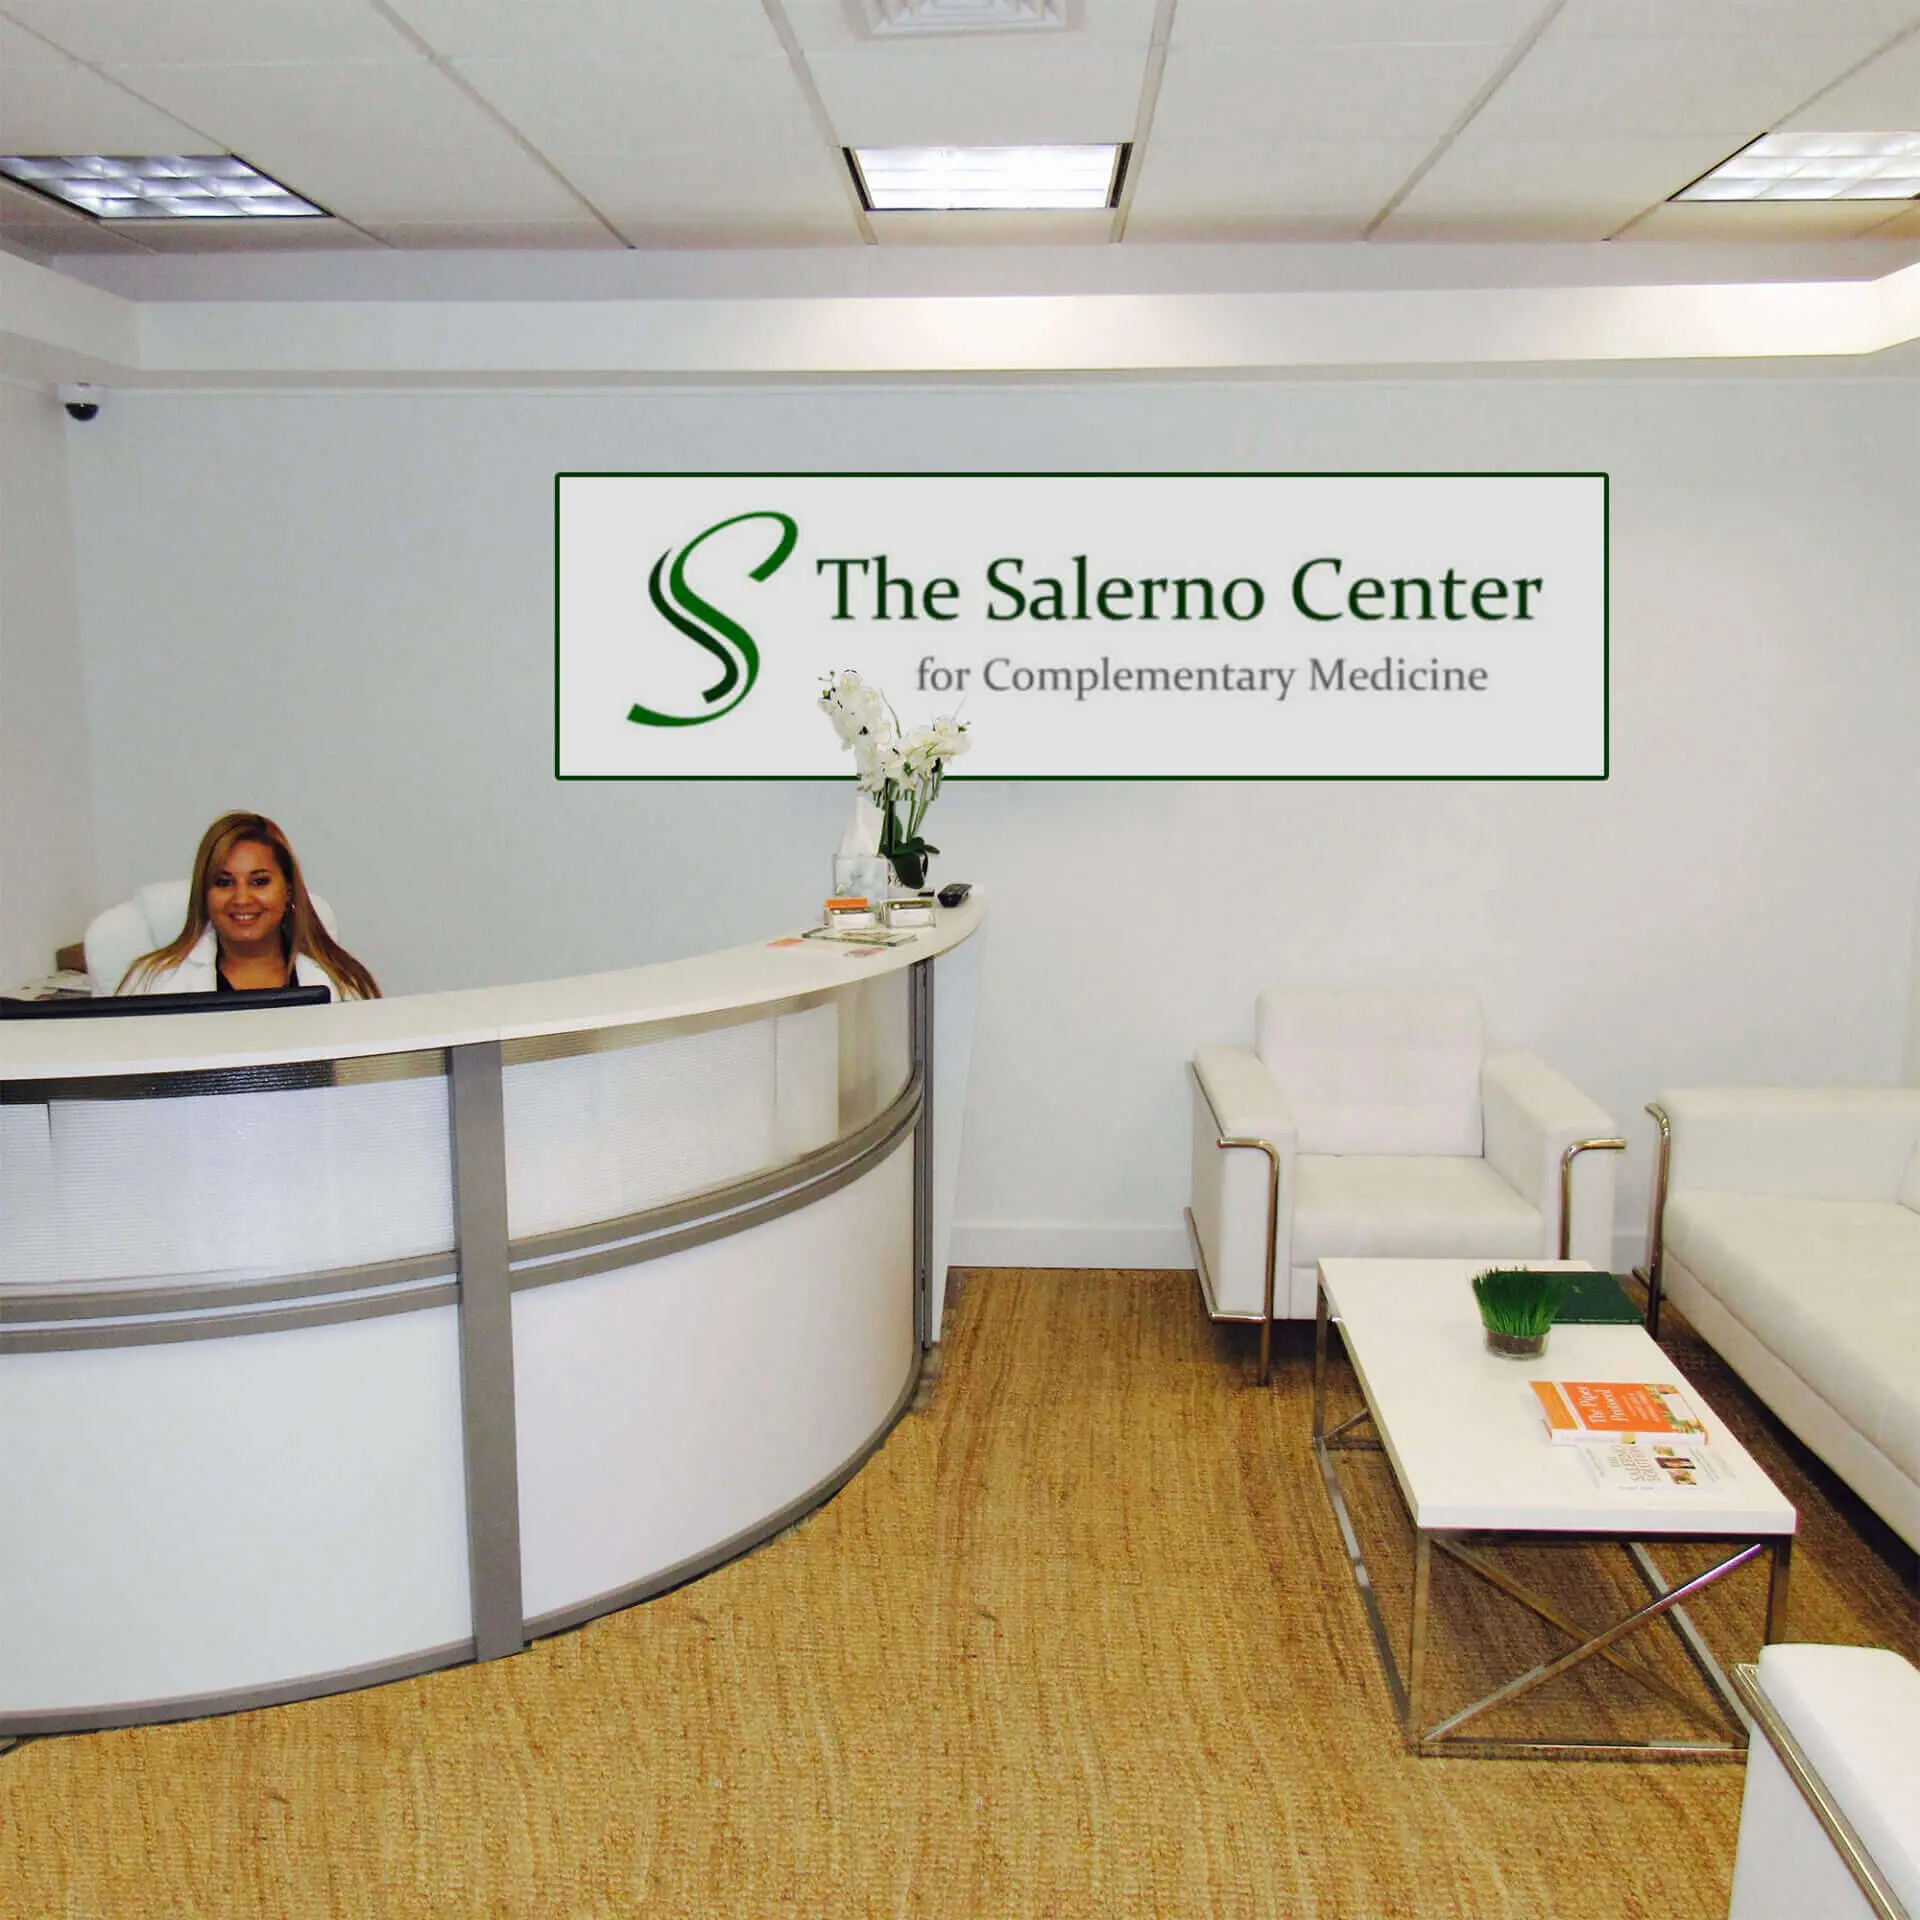 The Salerno Center for Complementary Medicine in New York City